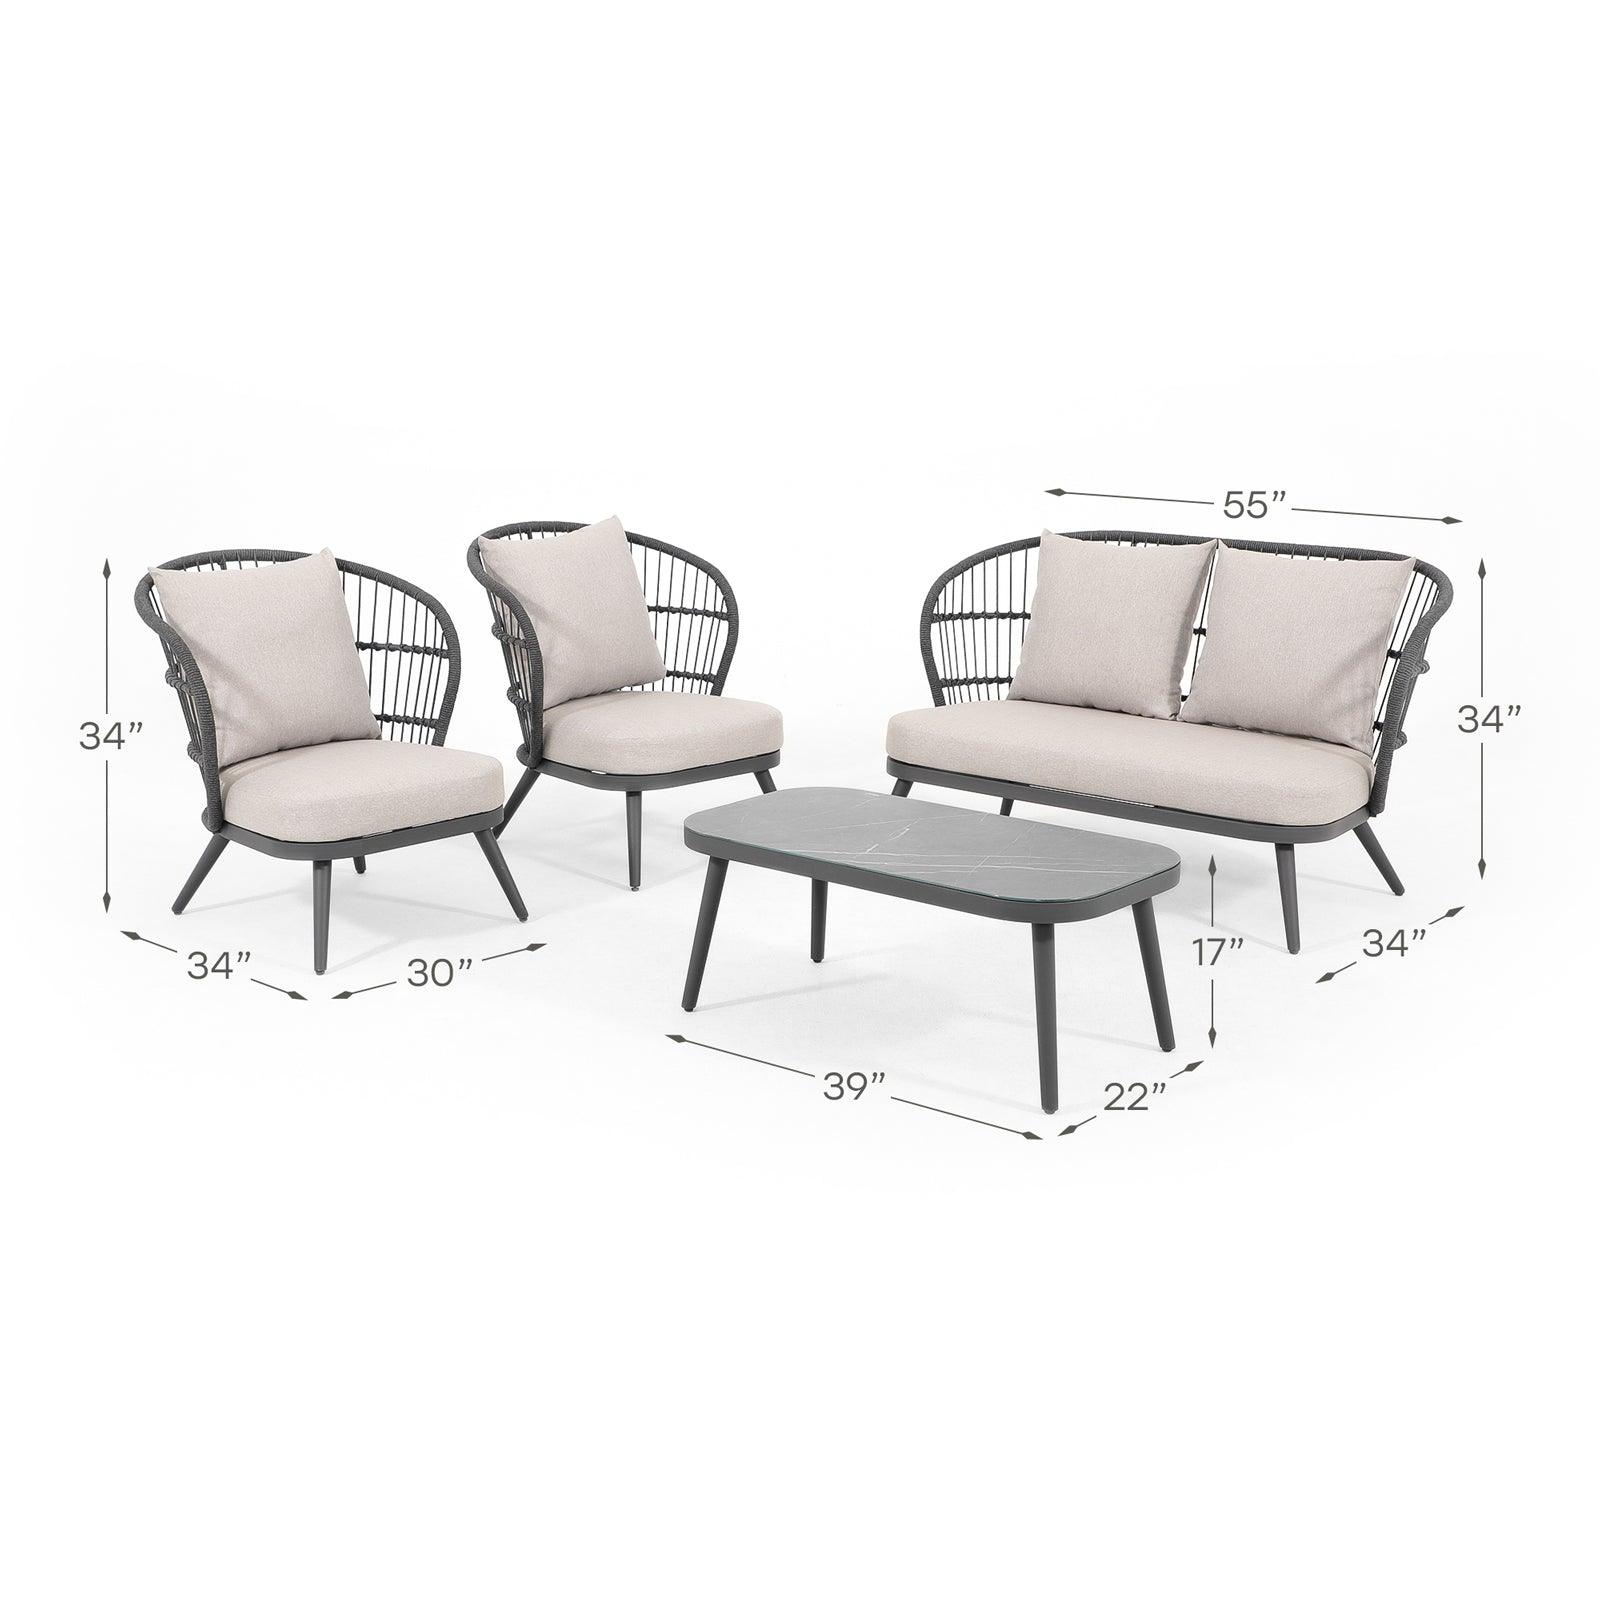 Comino 4-Piece dark grey aluminum Sofa Set with backrest rope design and light grey cushions, including a loveseat, 2 armchairs, 1 coffee table, dimension information - Jardina Furniture